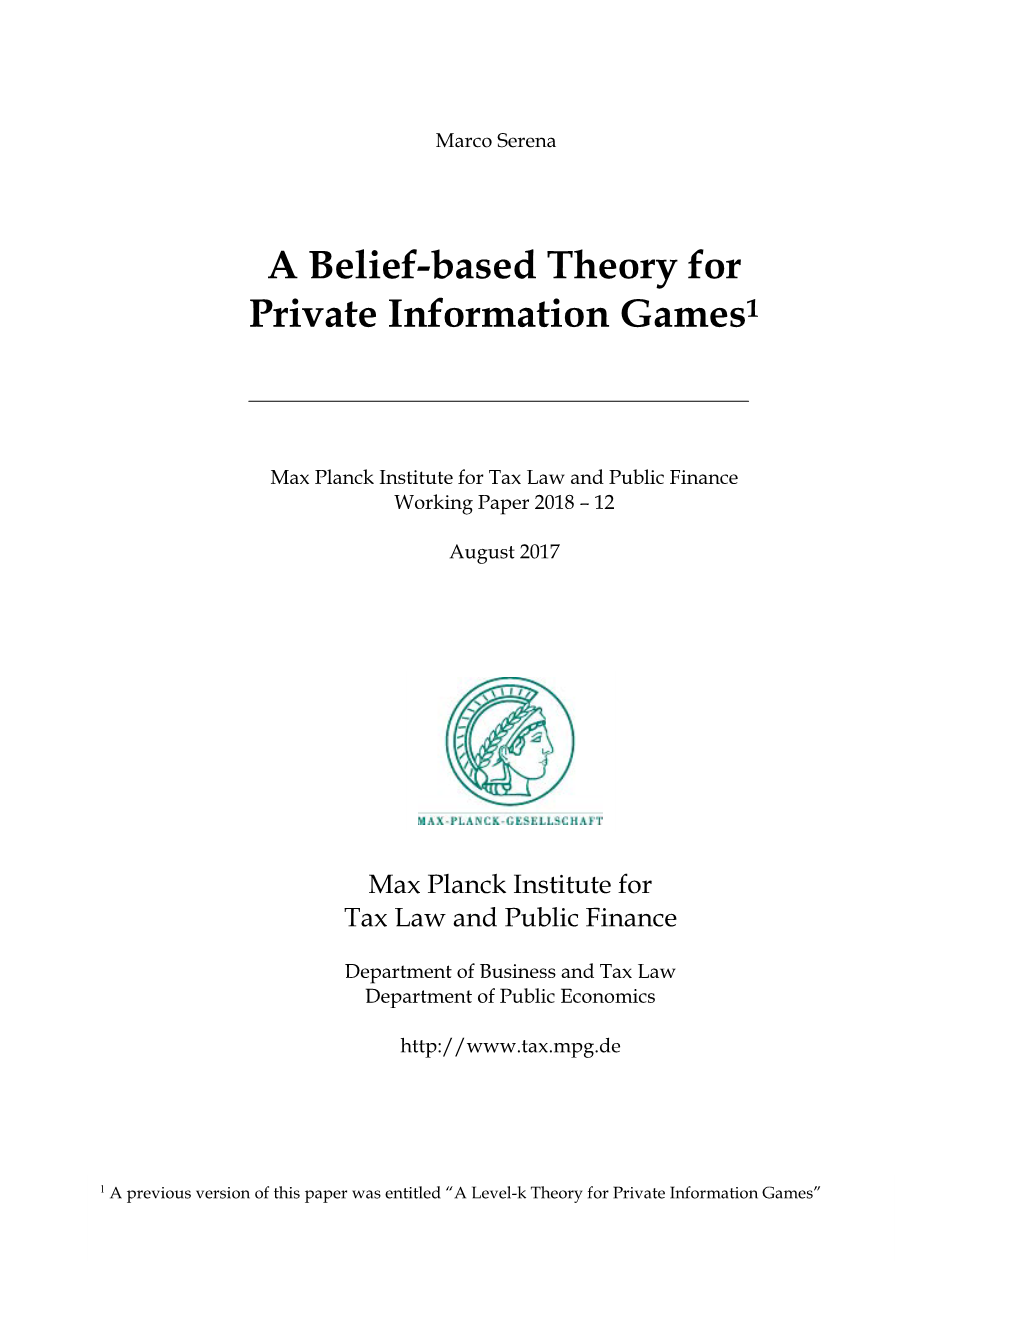 A Belief-Based Theory for Private Information Games1